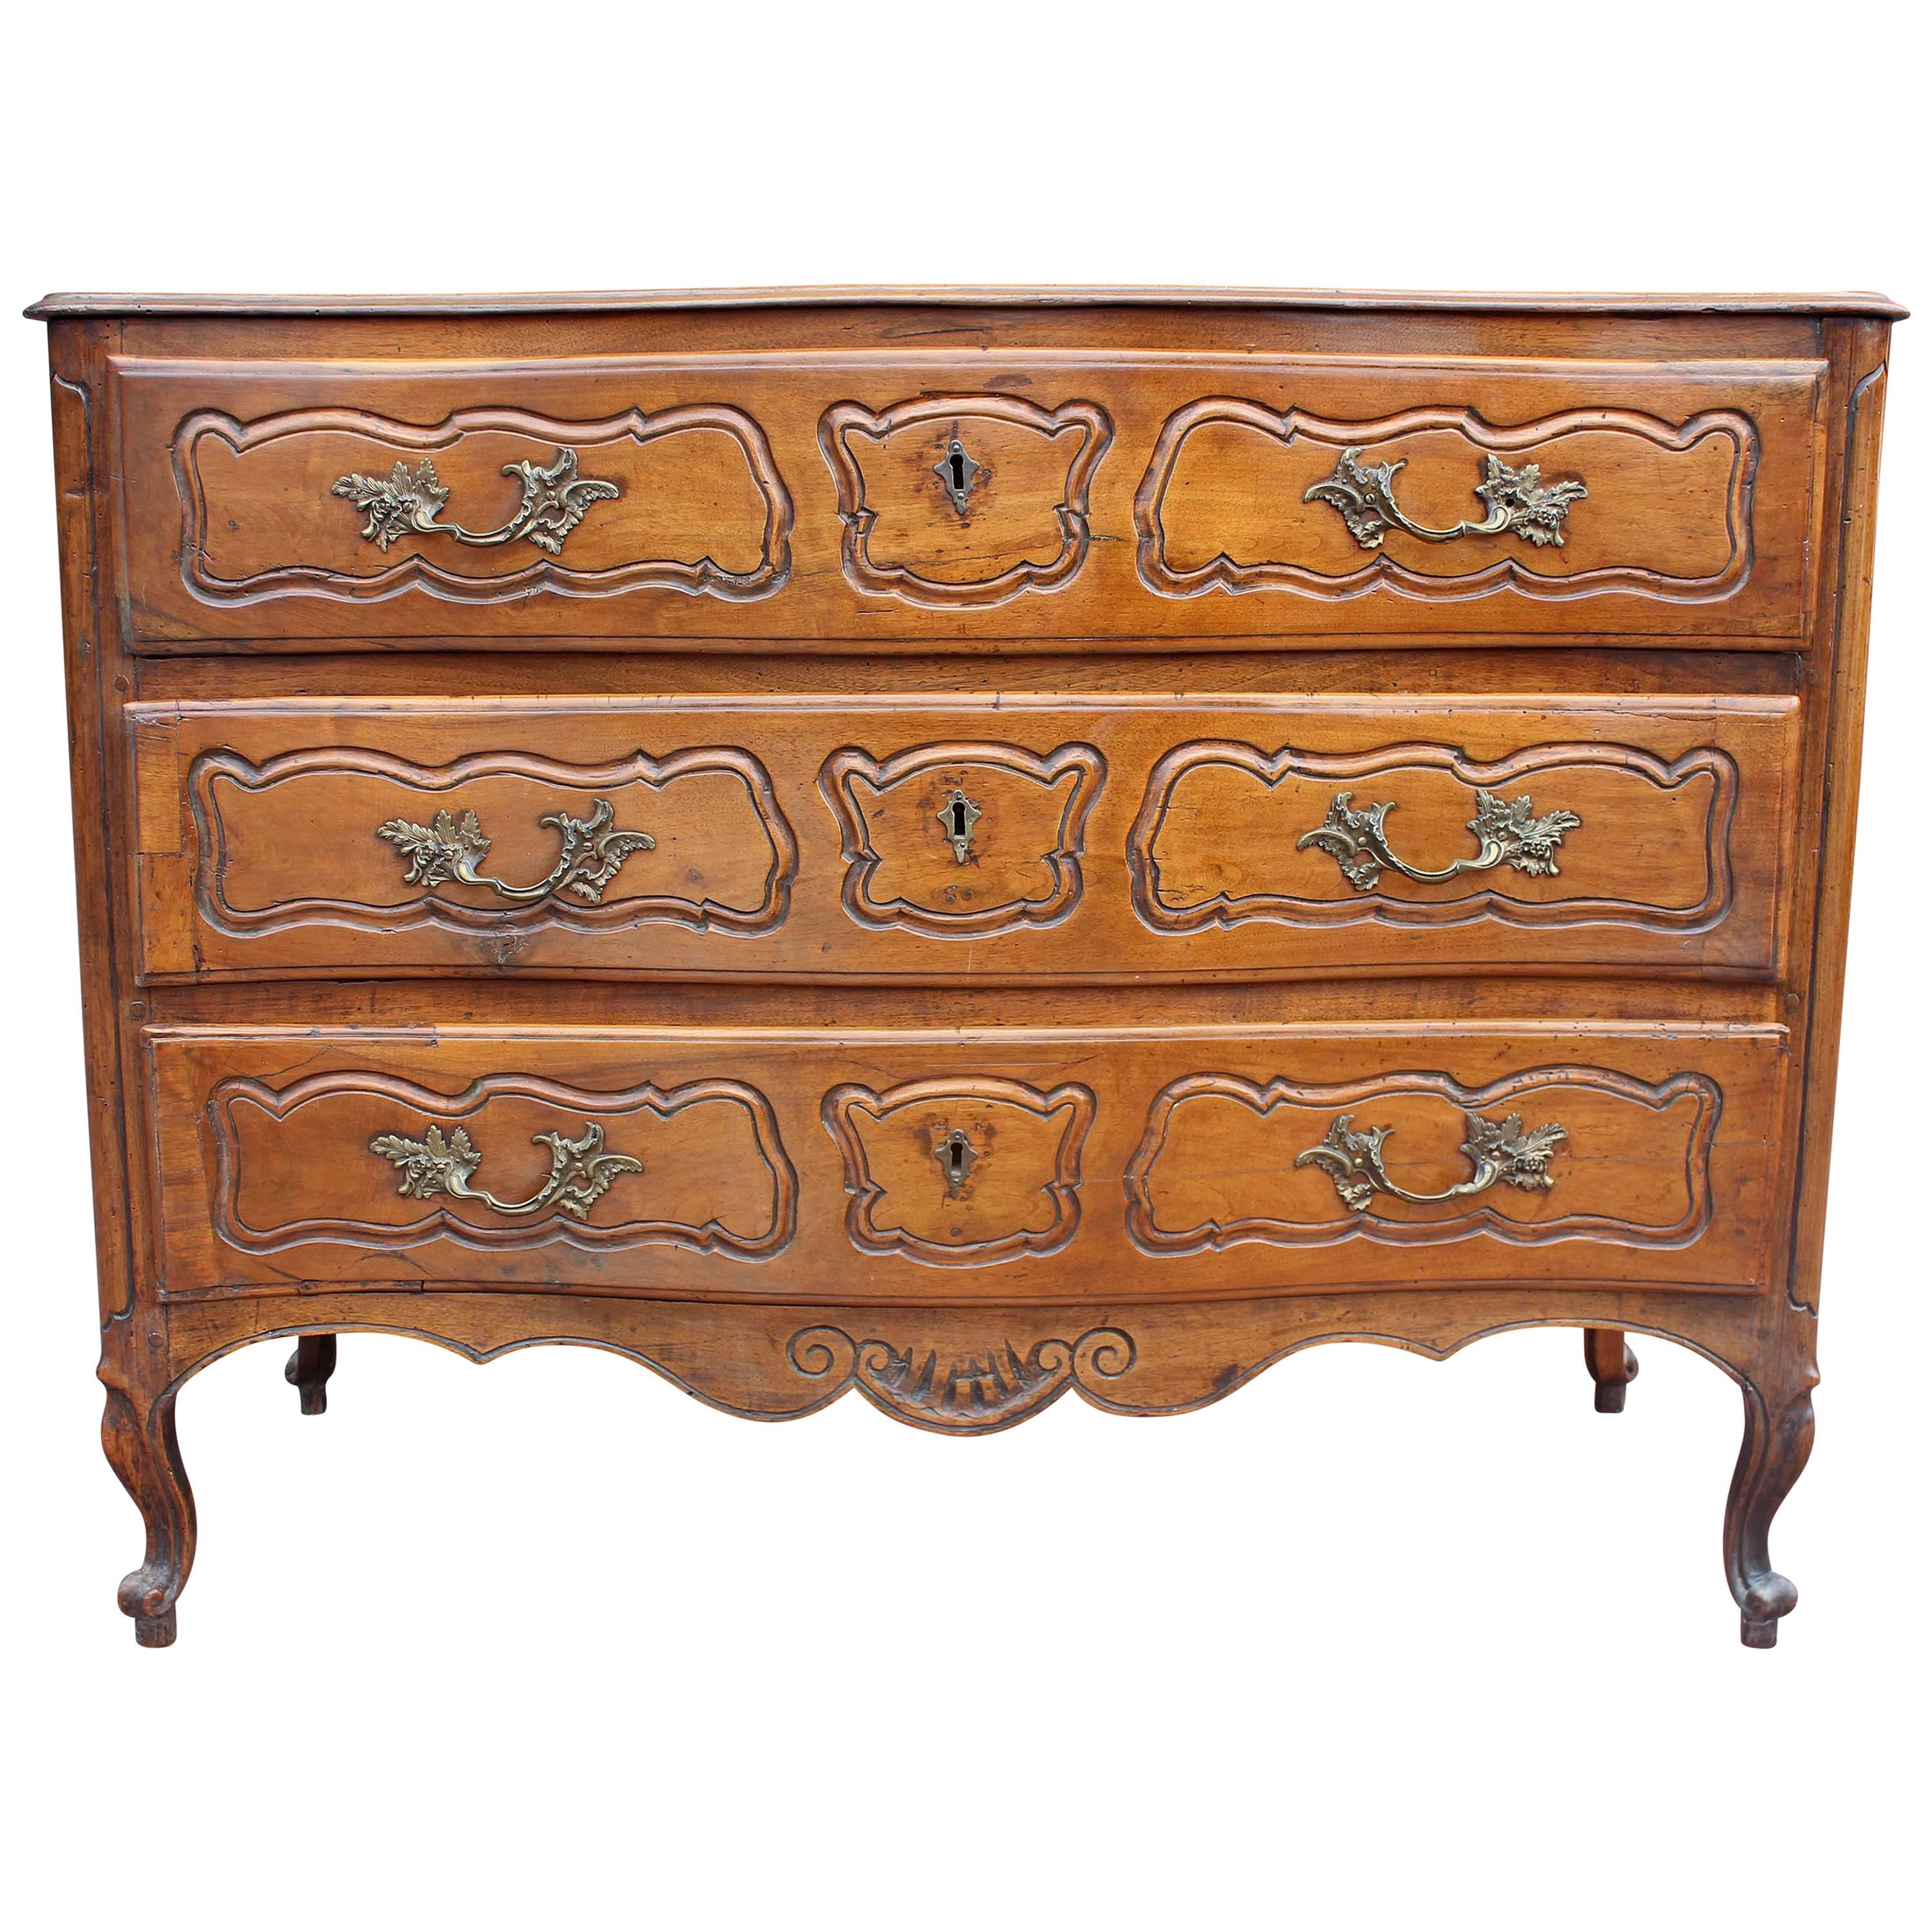 French Louis XV  Provincial 18th century serpentine commode chest of drawers. Carved drawer fronts and side panels. Carved cabriole legs. Original hardware. Warm color and good size. Fruitwood.